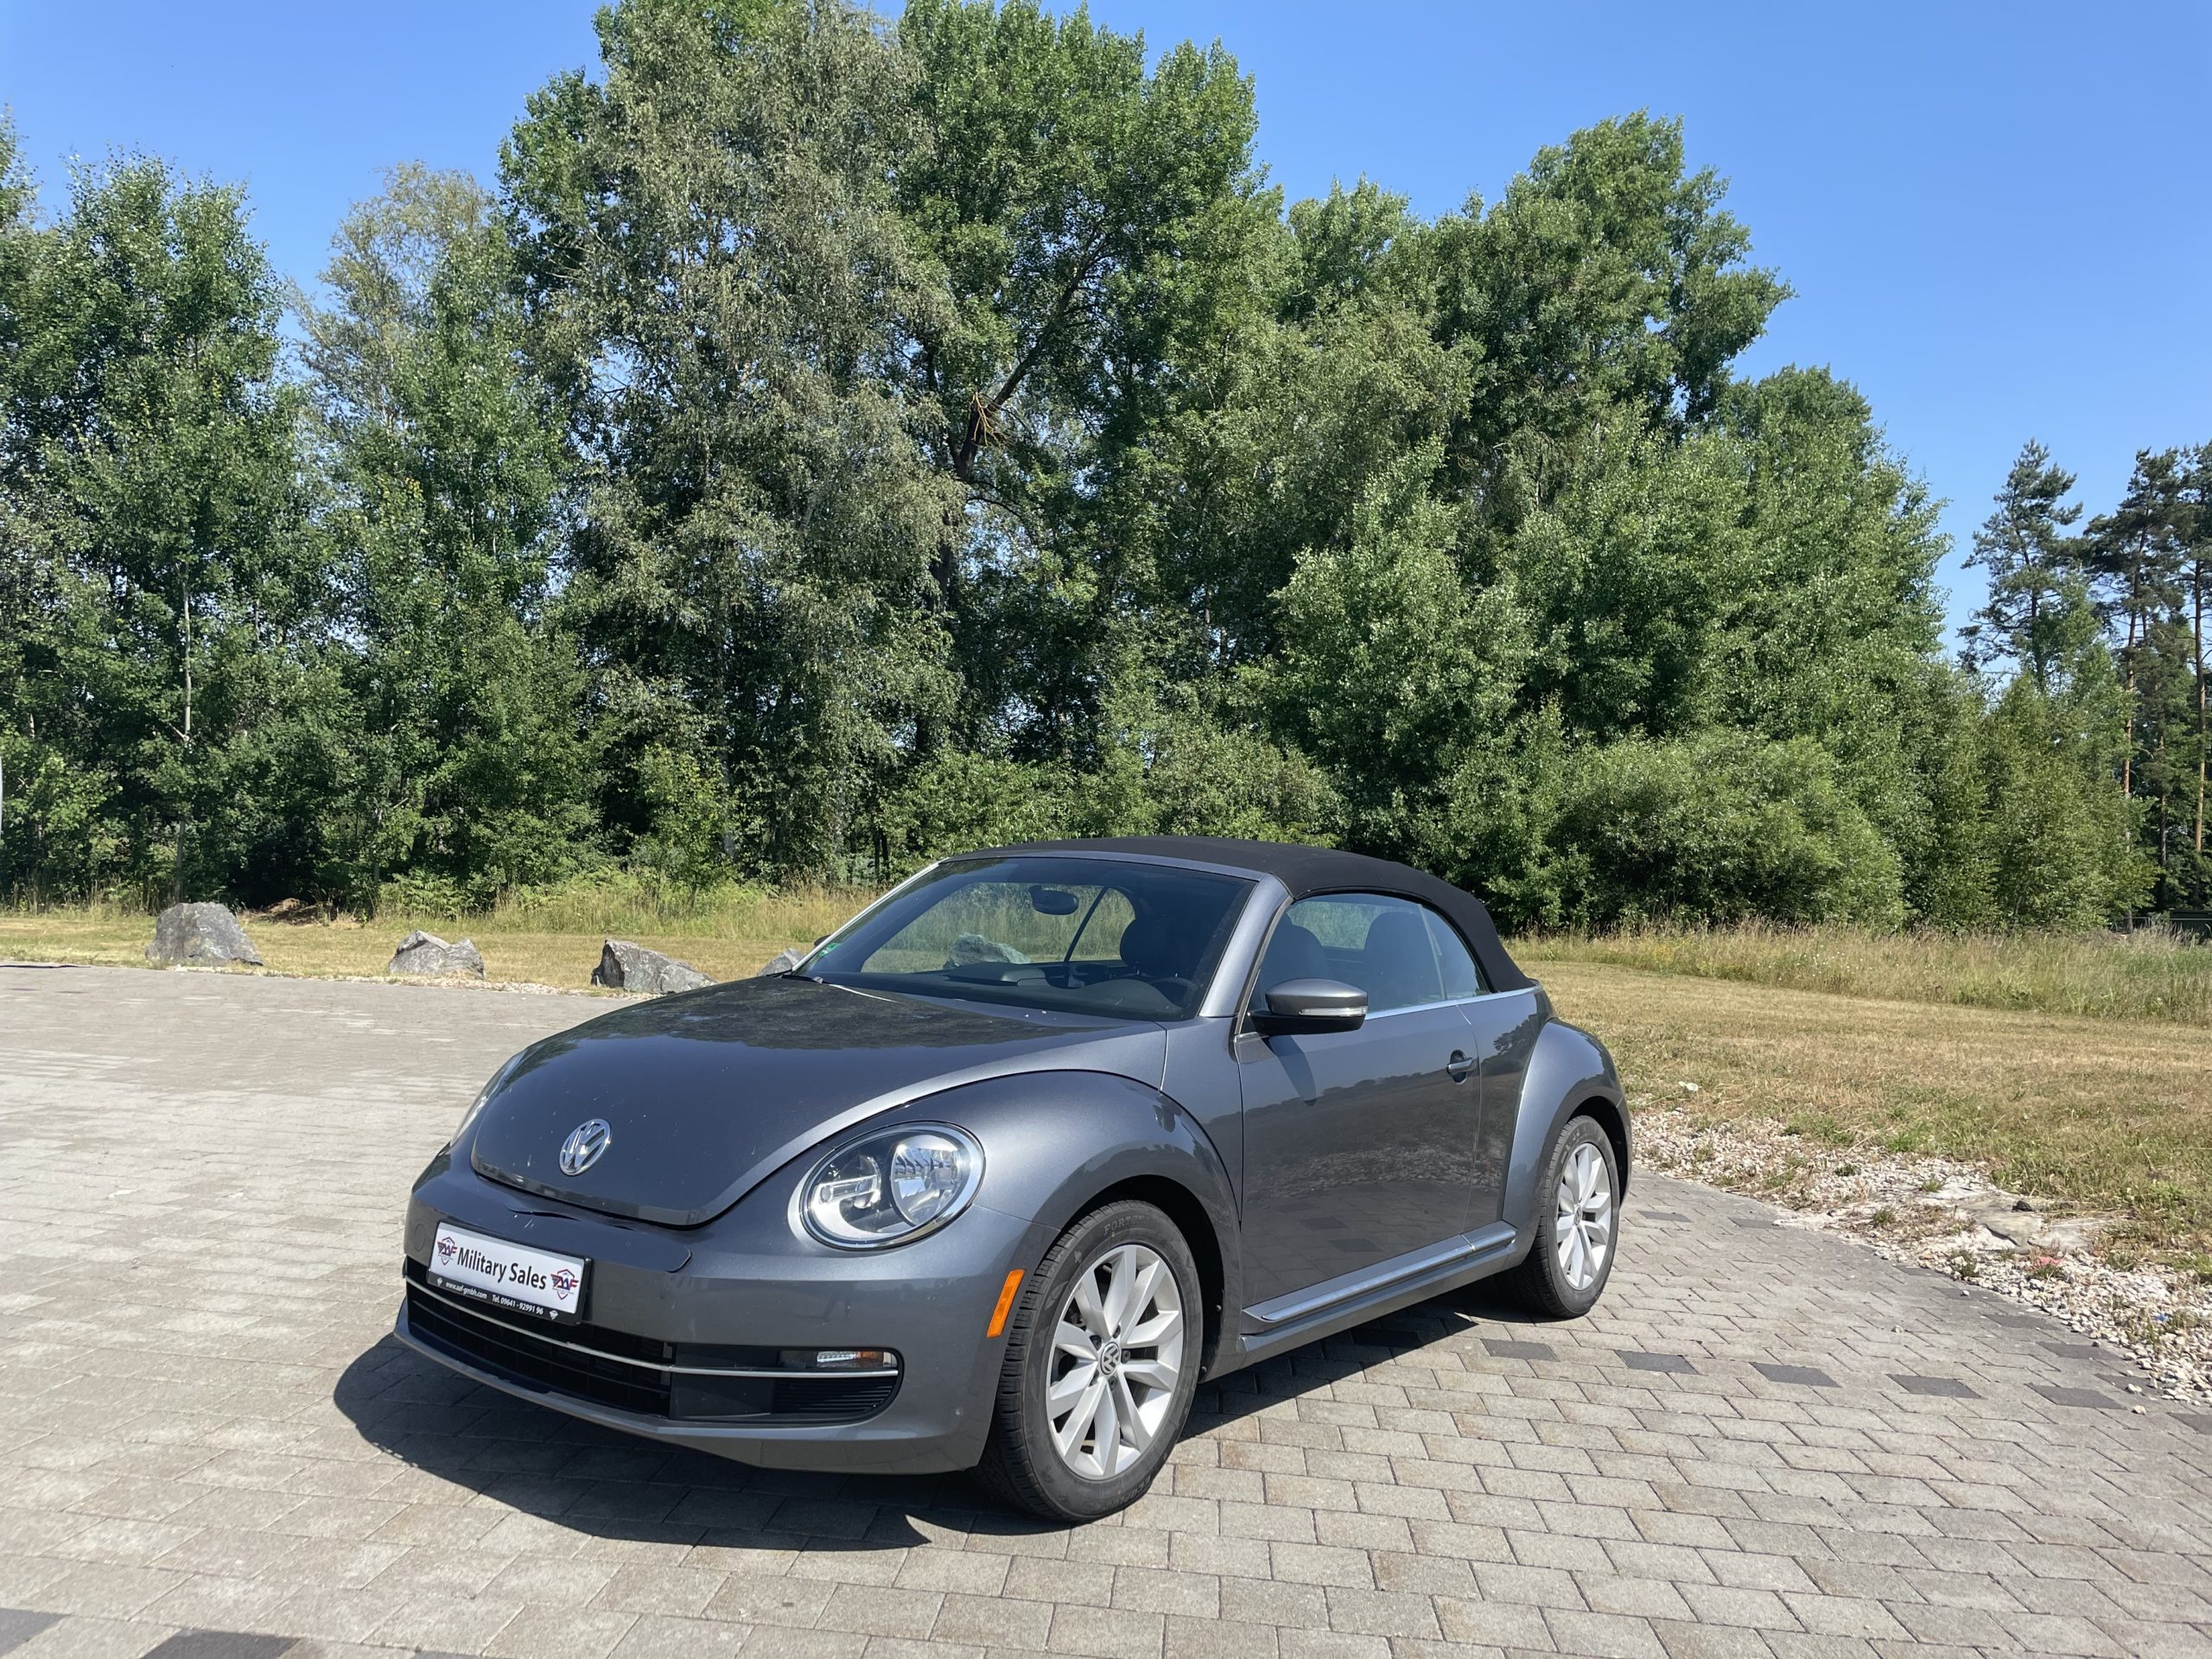 2014 Volkswagen Beetle Convertible <br>FWD</br>as low as </br>$174 per paycheck